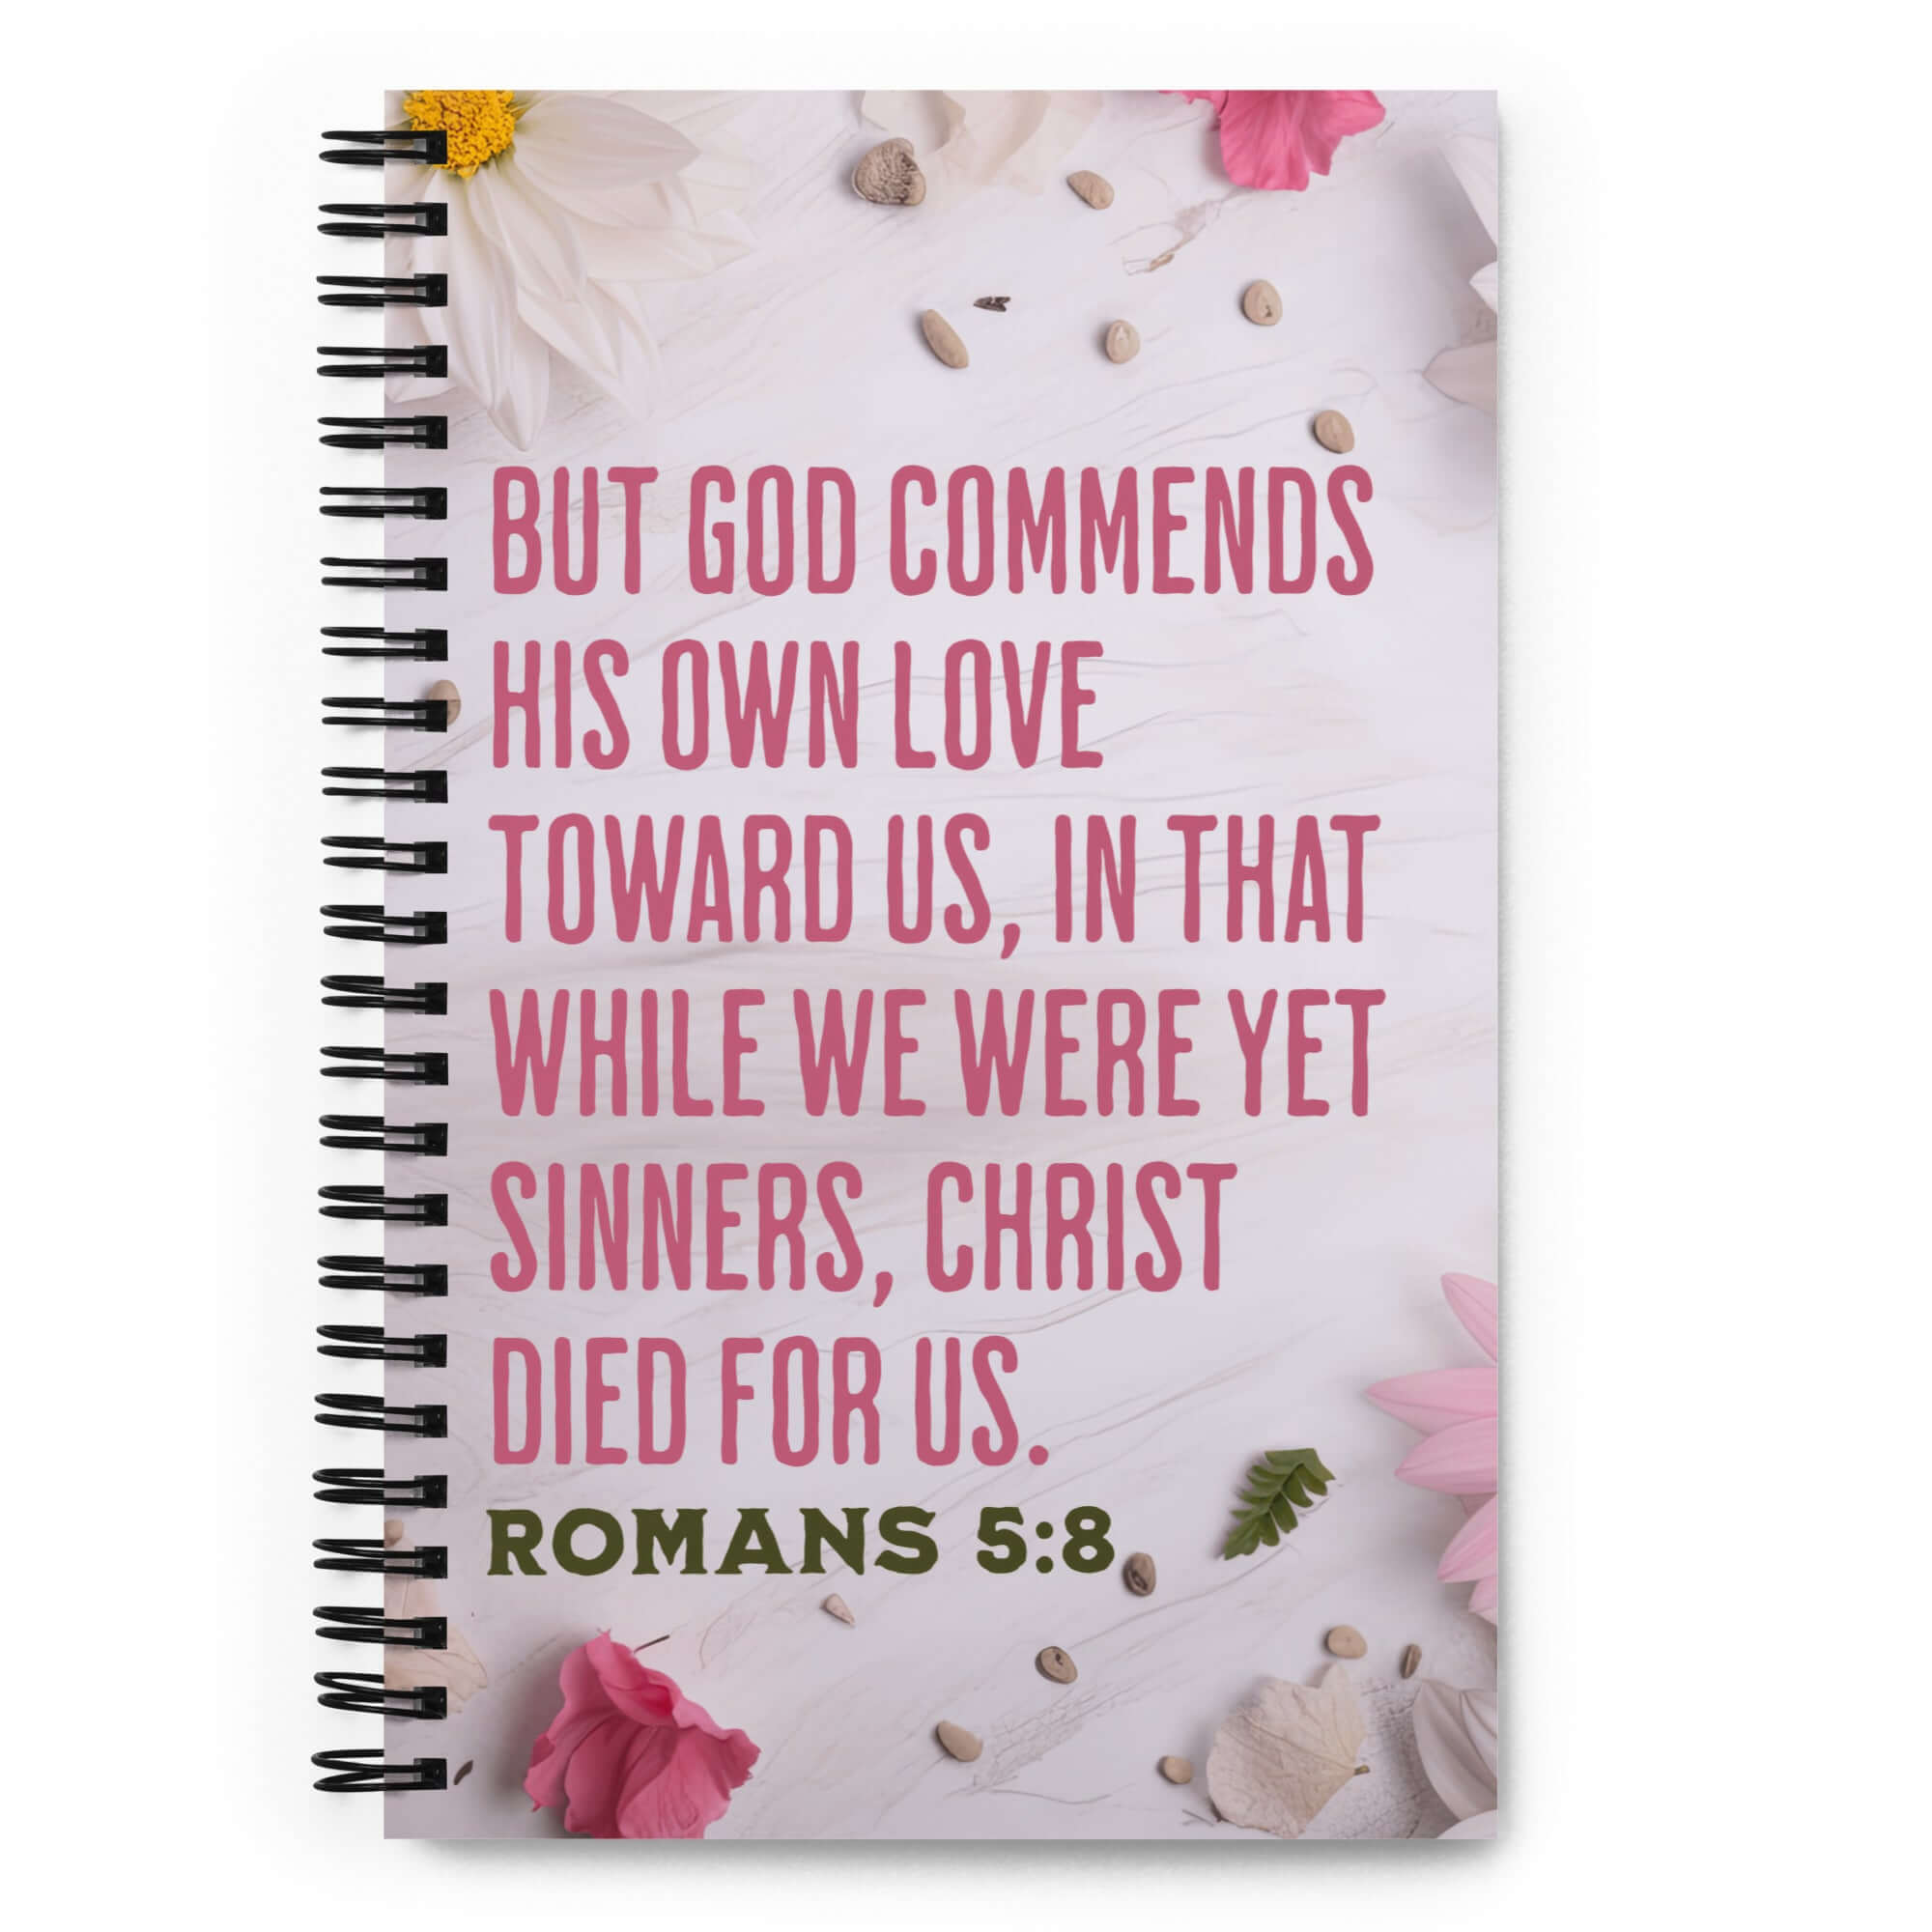 Romans 5:8 - Bible Verse, Christ Died for Us Spiral Notebook